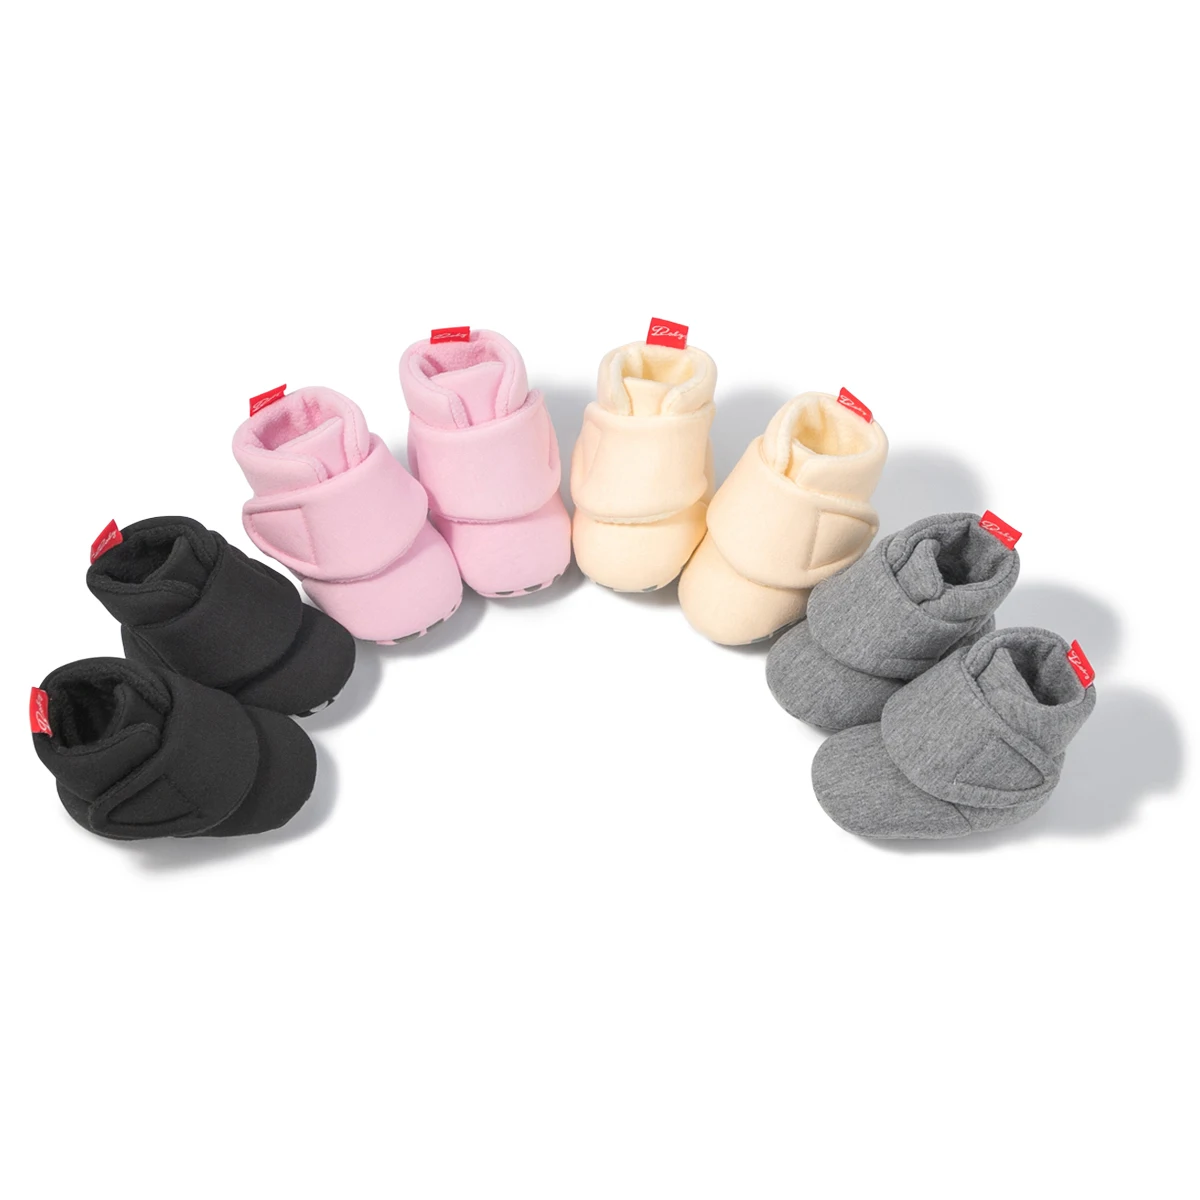 New Arrival Fashion Baby Shoes Star Soft Cotton Indoor Prewalk Warm Socks Booties Baby Socks Shoes